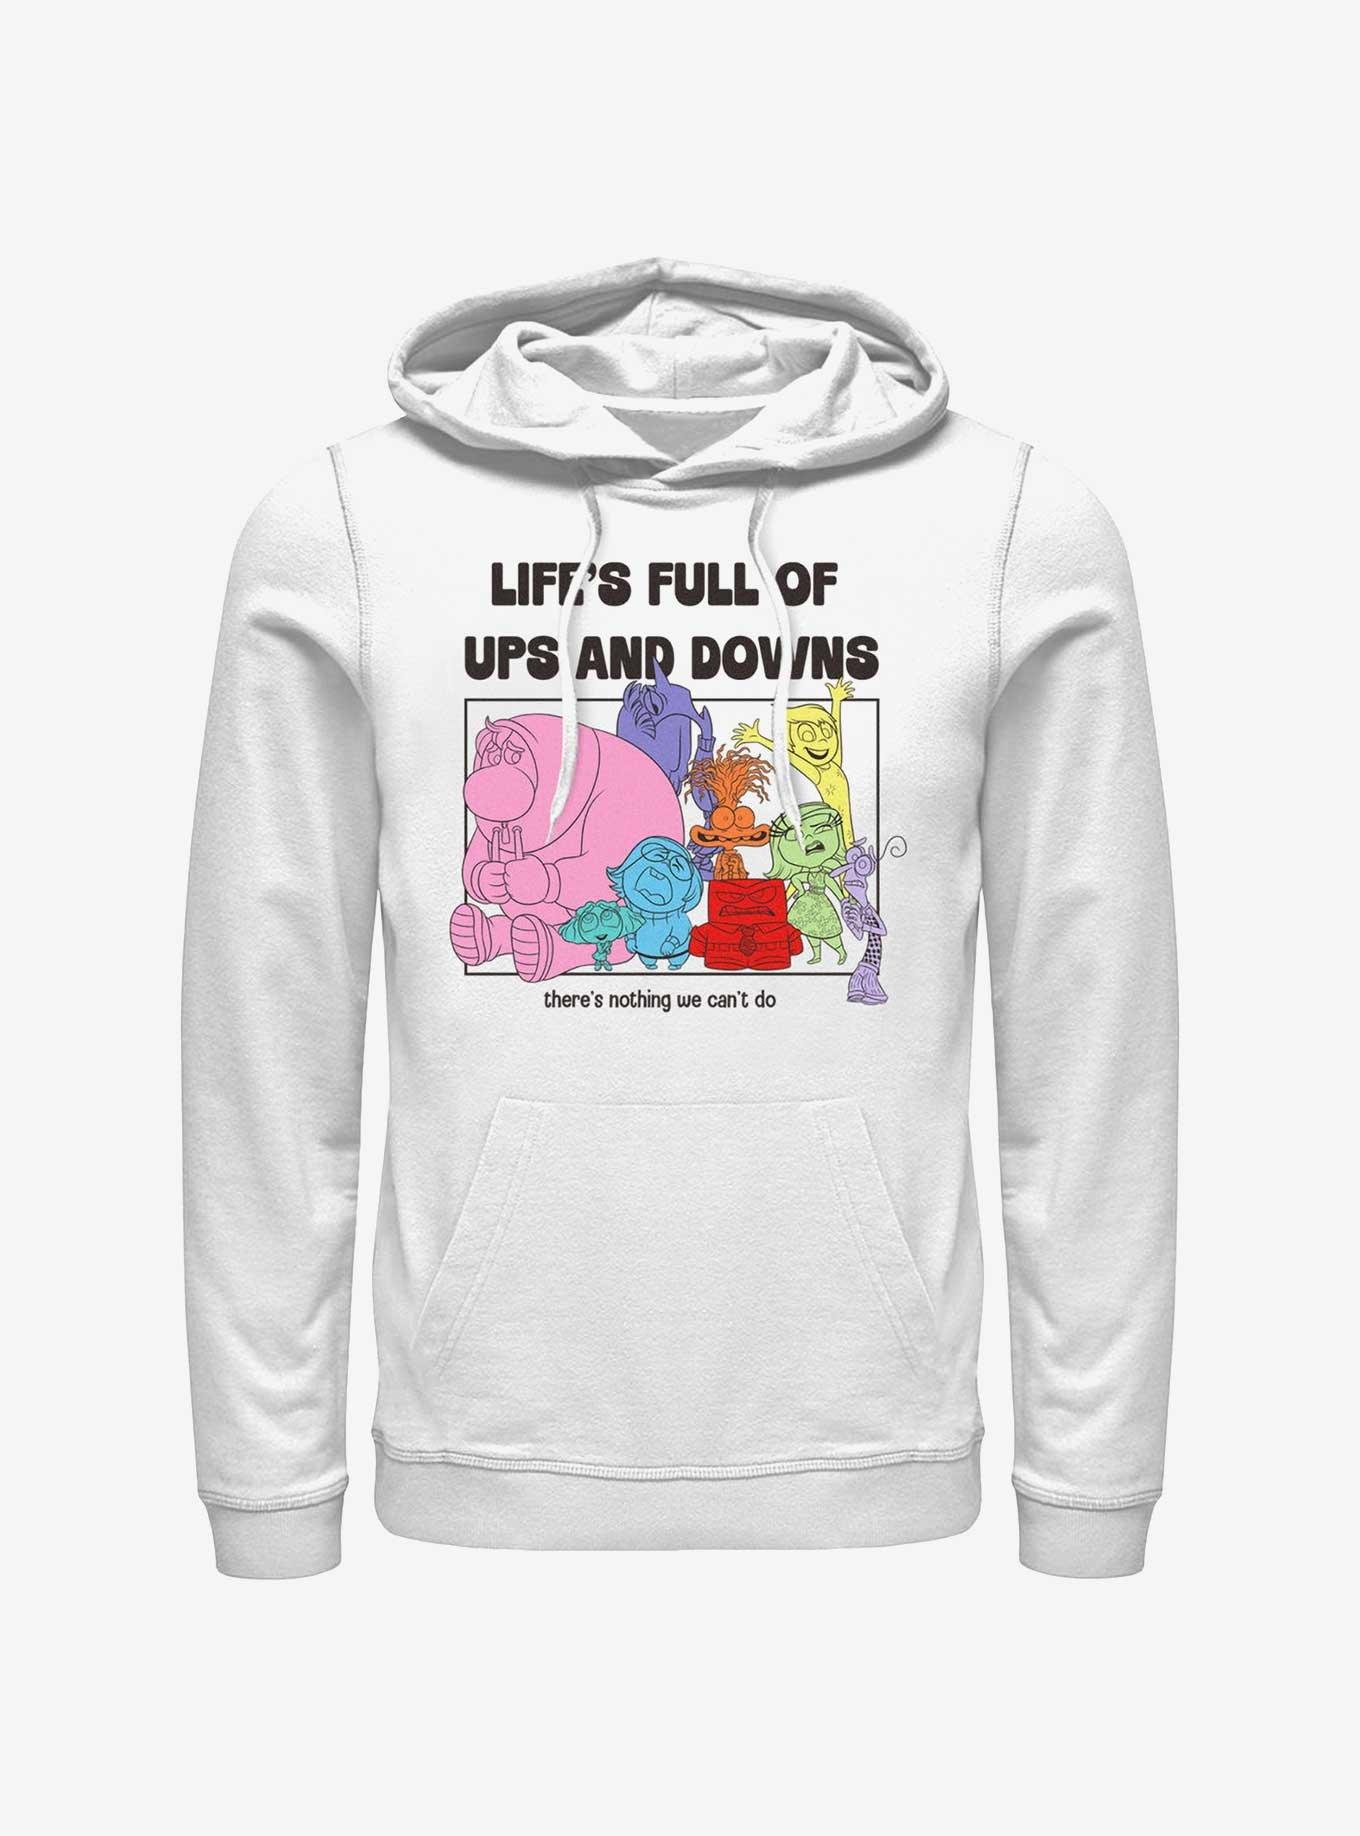 Disney Pixar Inside Out 2 Life's Full Of Ups And Downs Hoodie, WHITE, hi-res